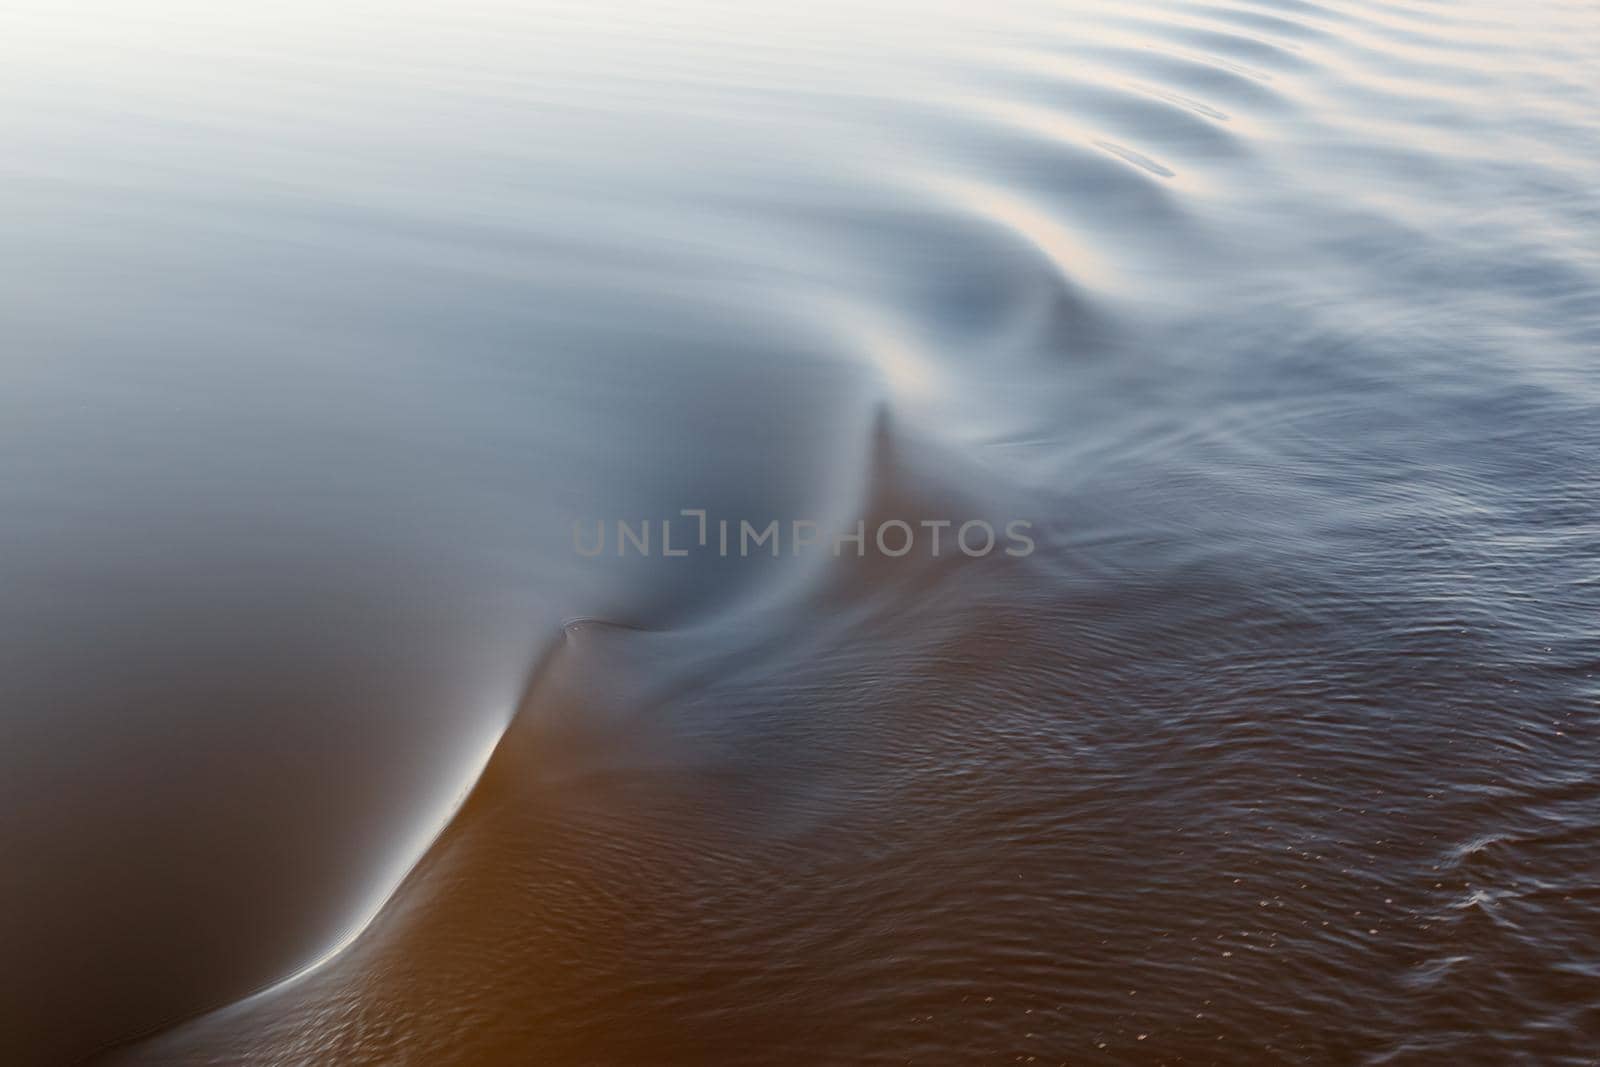 Footprint of the ship. Water twisted by a boat propeller. Beautiful water surface texture. Horizontal photo